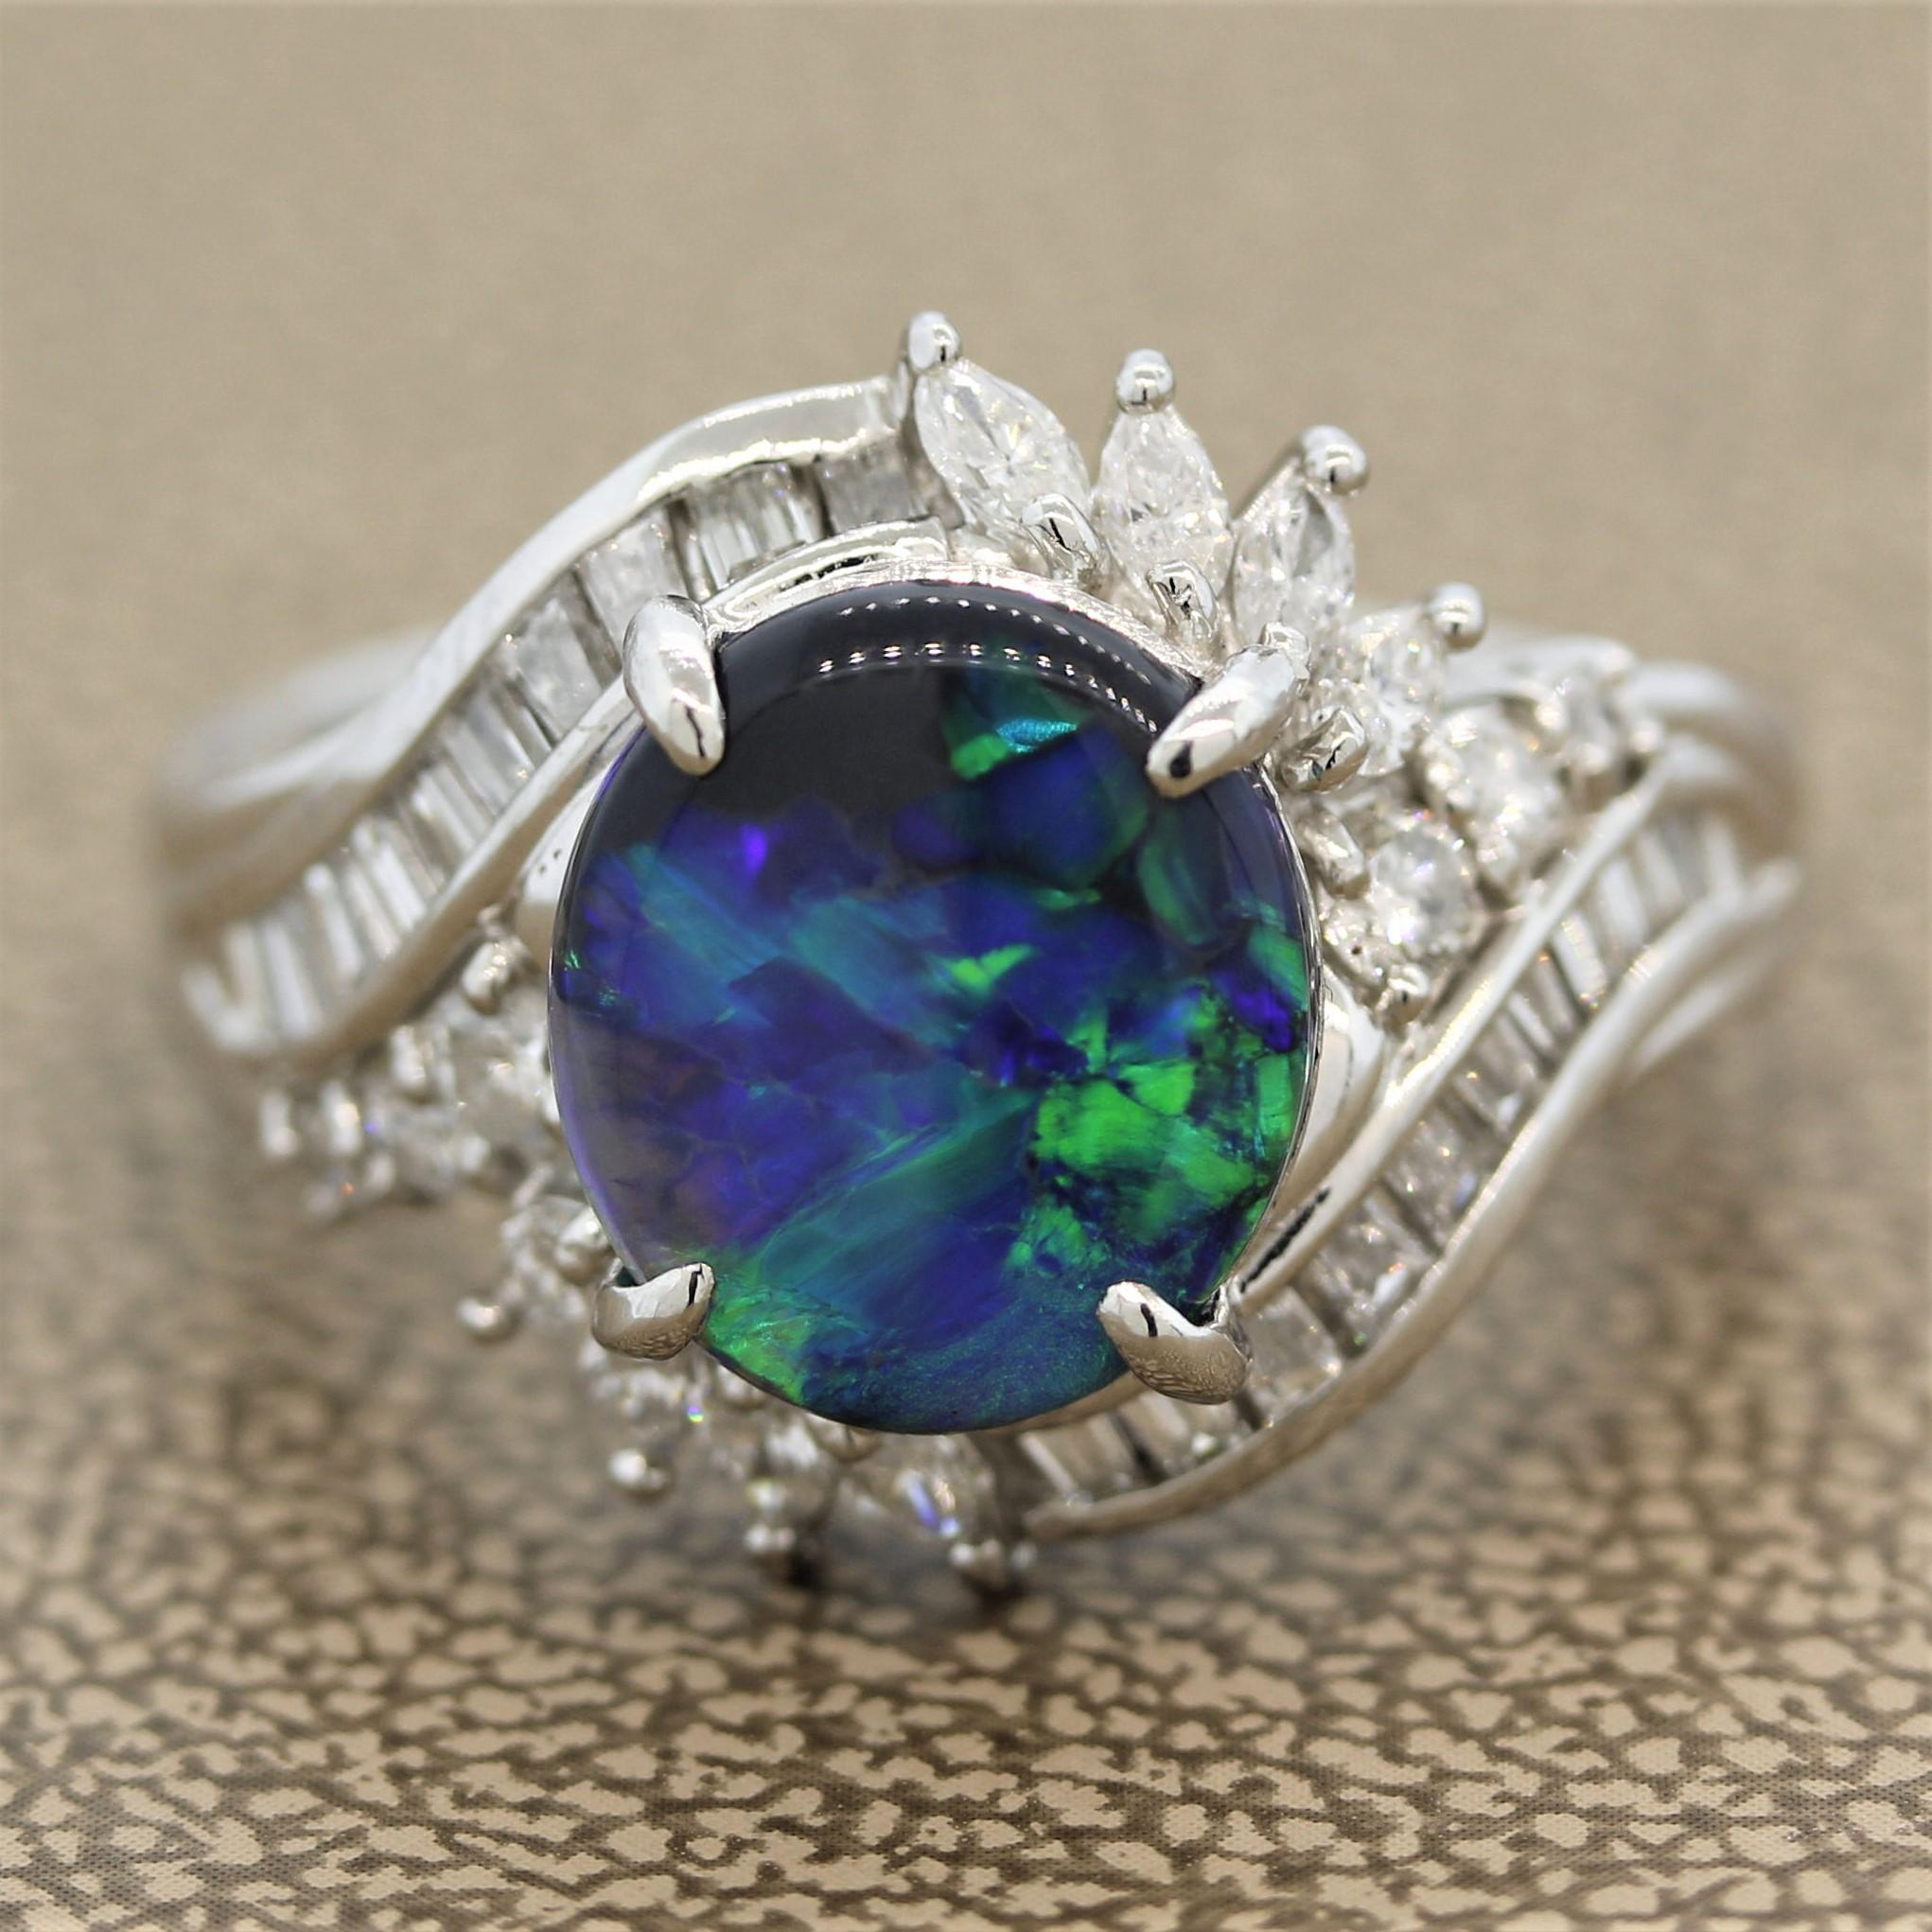 A classic blue-green black opal from Lightning Ridge, Australia. It weighs 2.16 carats and shows bright strong flashes of green and blue. It is accented by 0.93 carats of round brilliant, marquise and baguette cut diamonds set in a swirl pattern